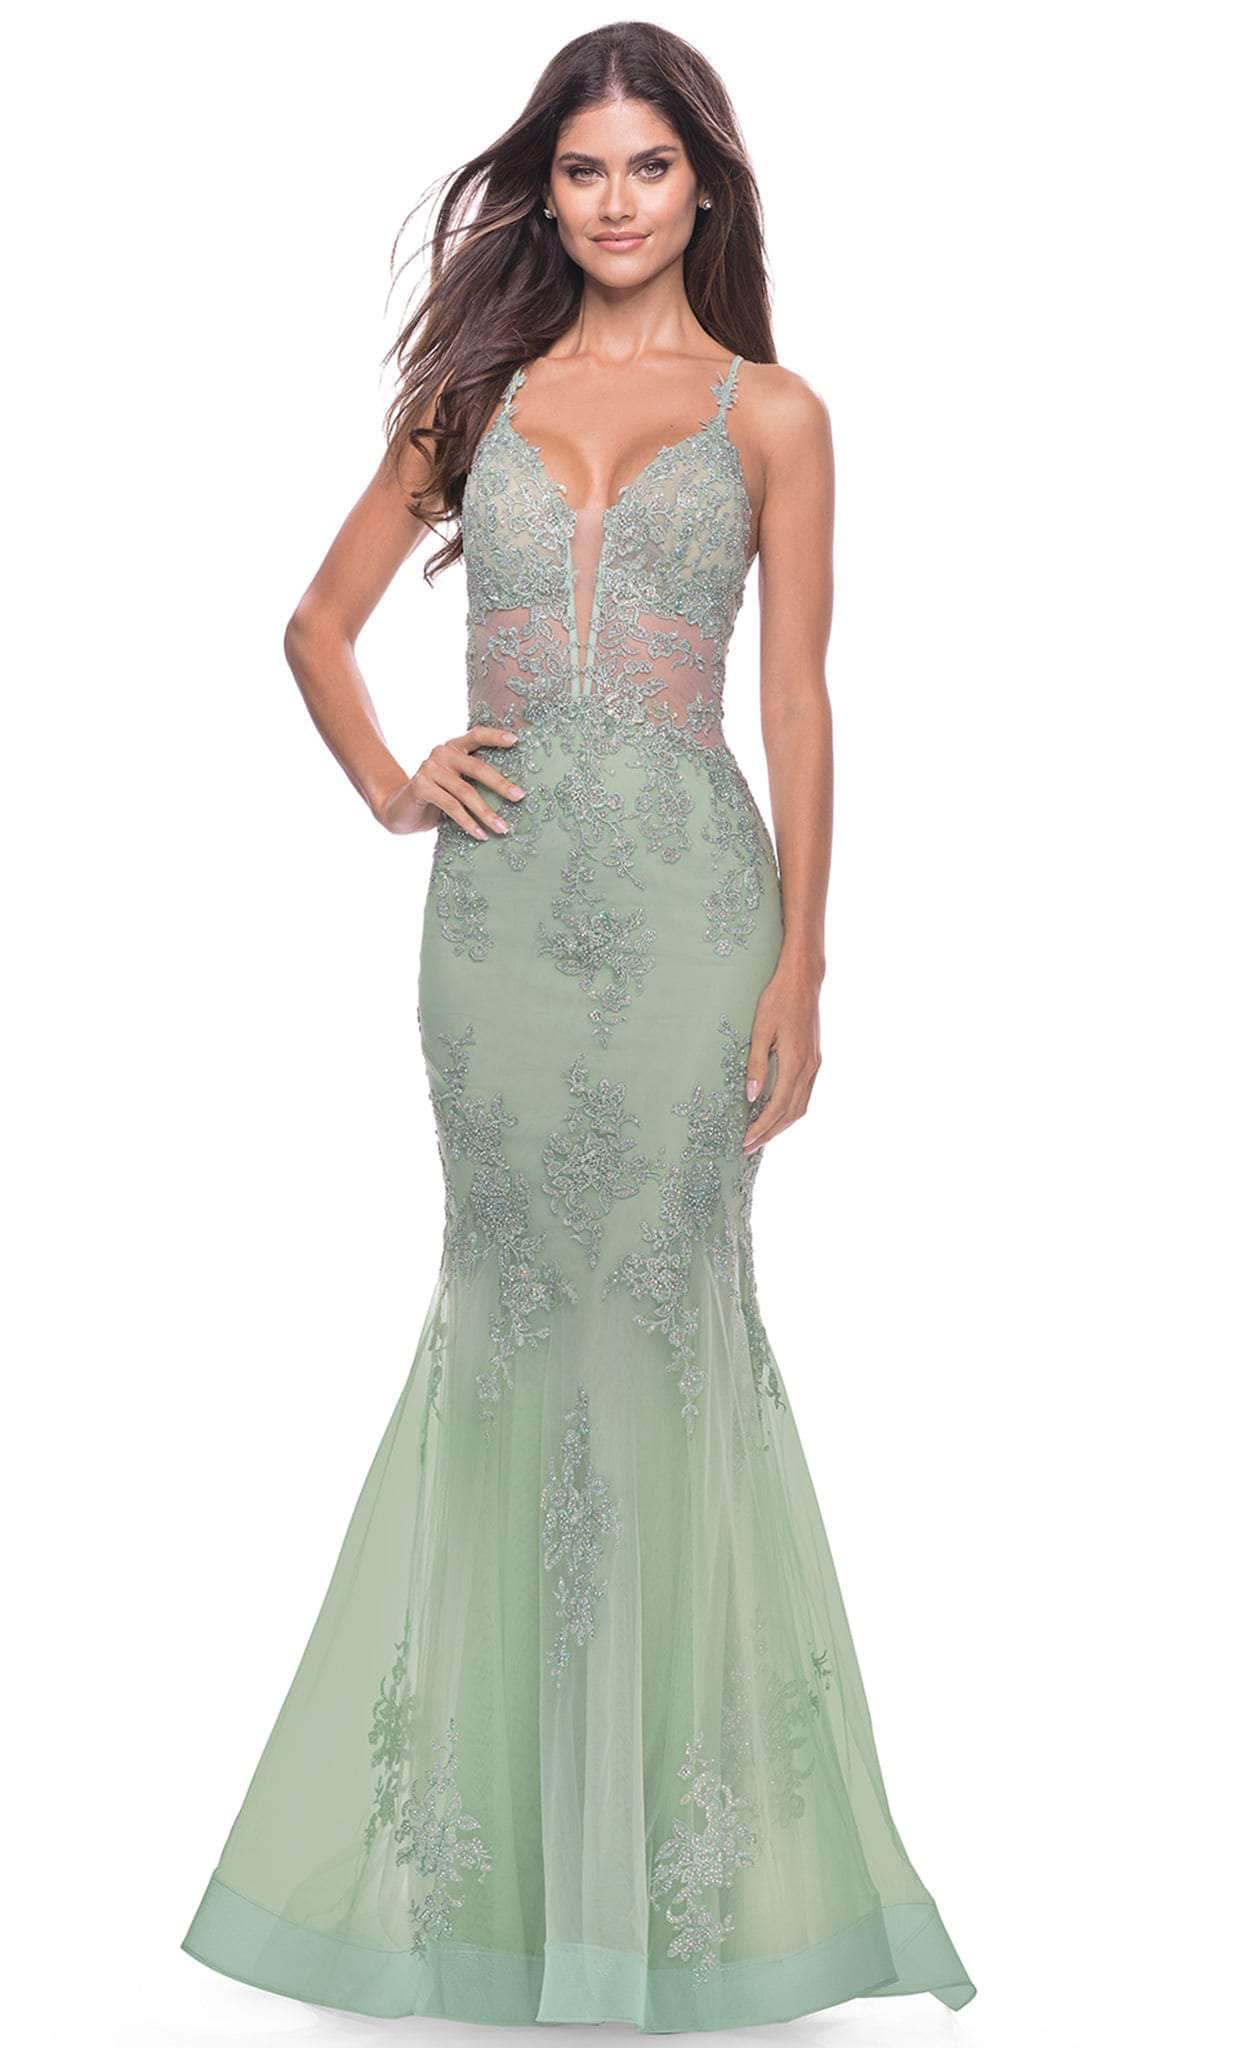 Image of La Femme 31598 - Tulle Trumpet Embroidered Gown